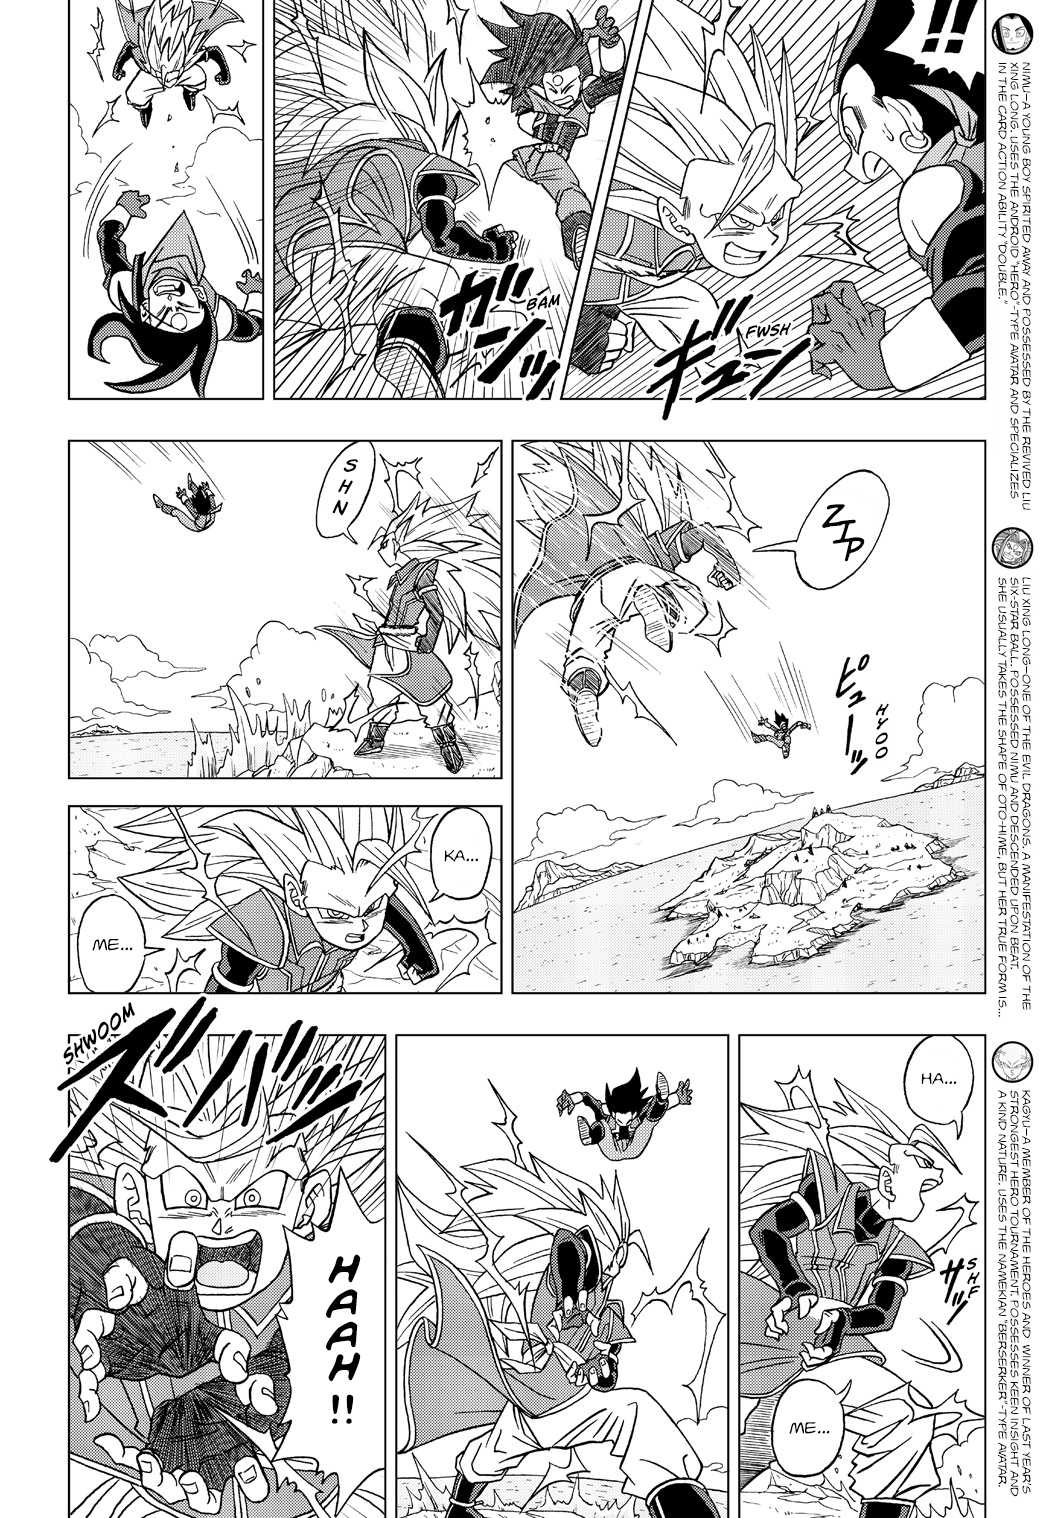 Dragon Ball Heroes - Victory Mission - Page 2